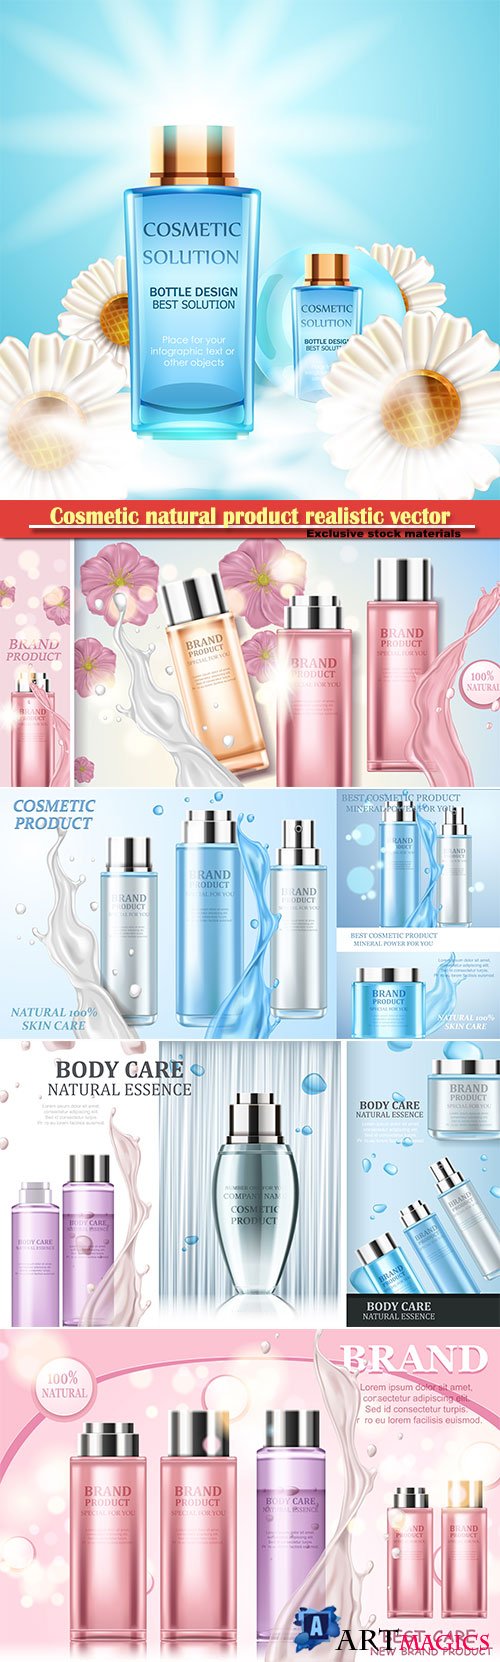 Cosmetic natural product realistic vector illustration